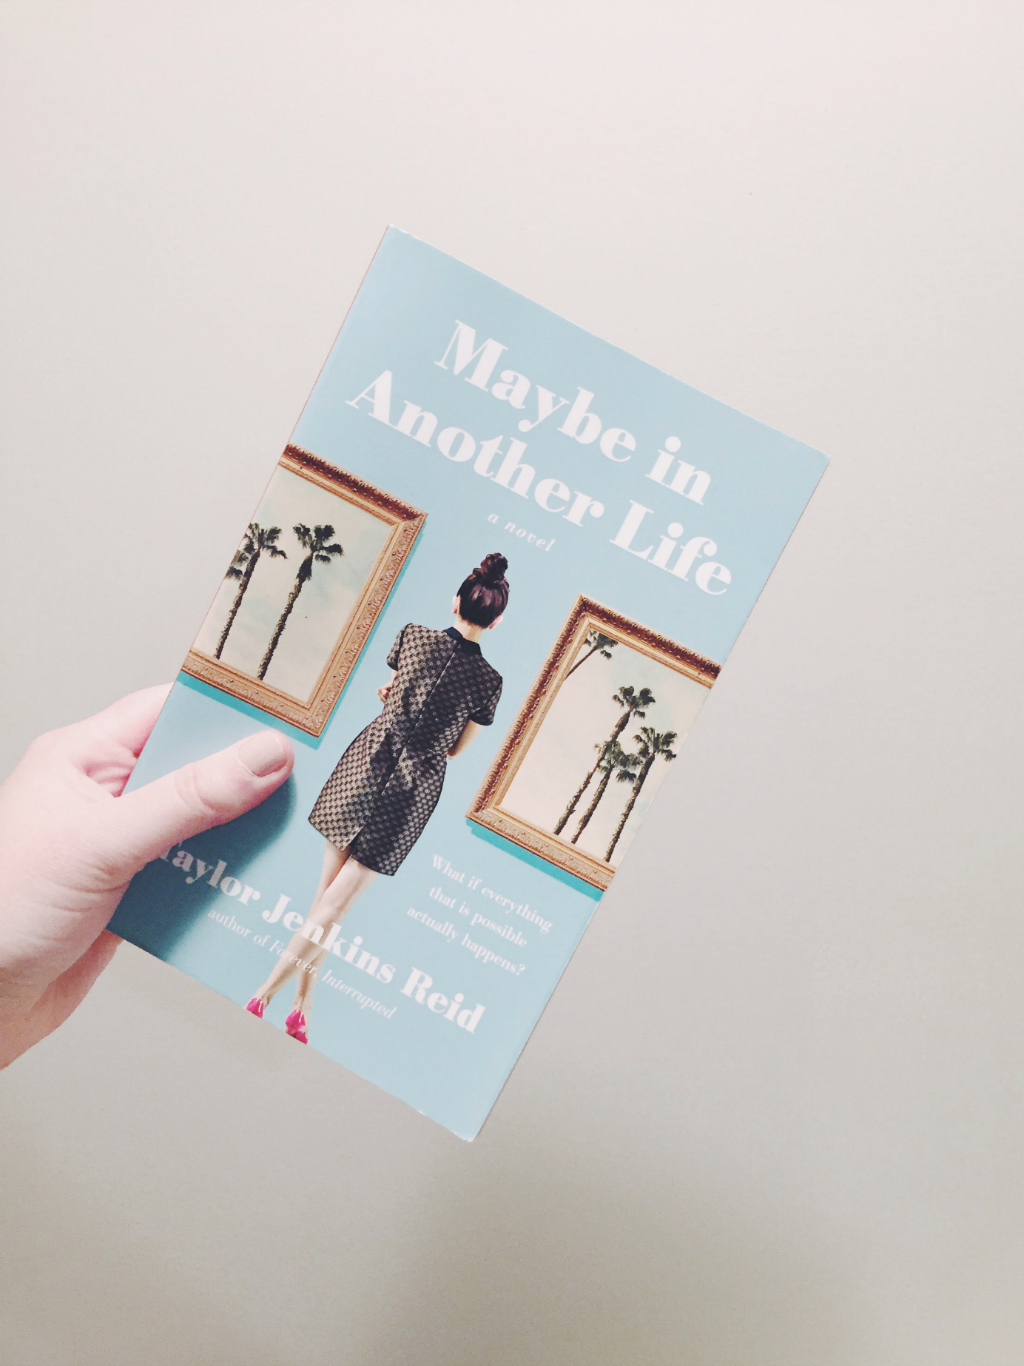 maybeinanotherlife-bookreview